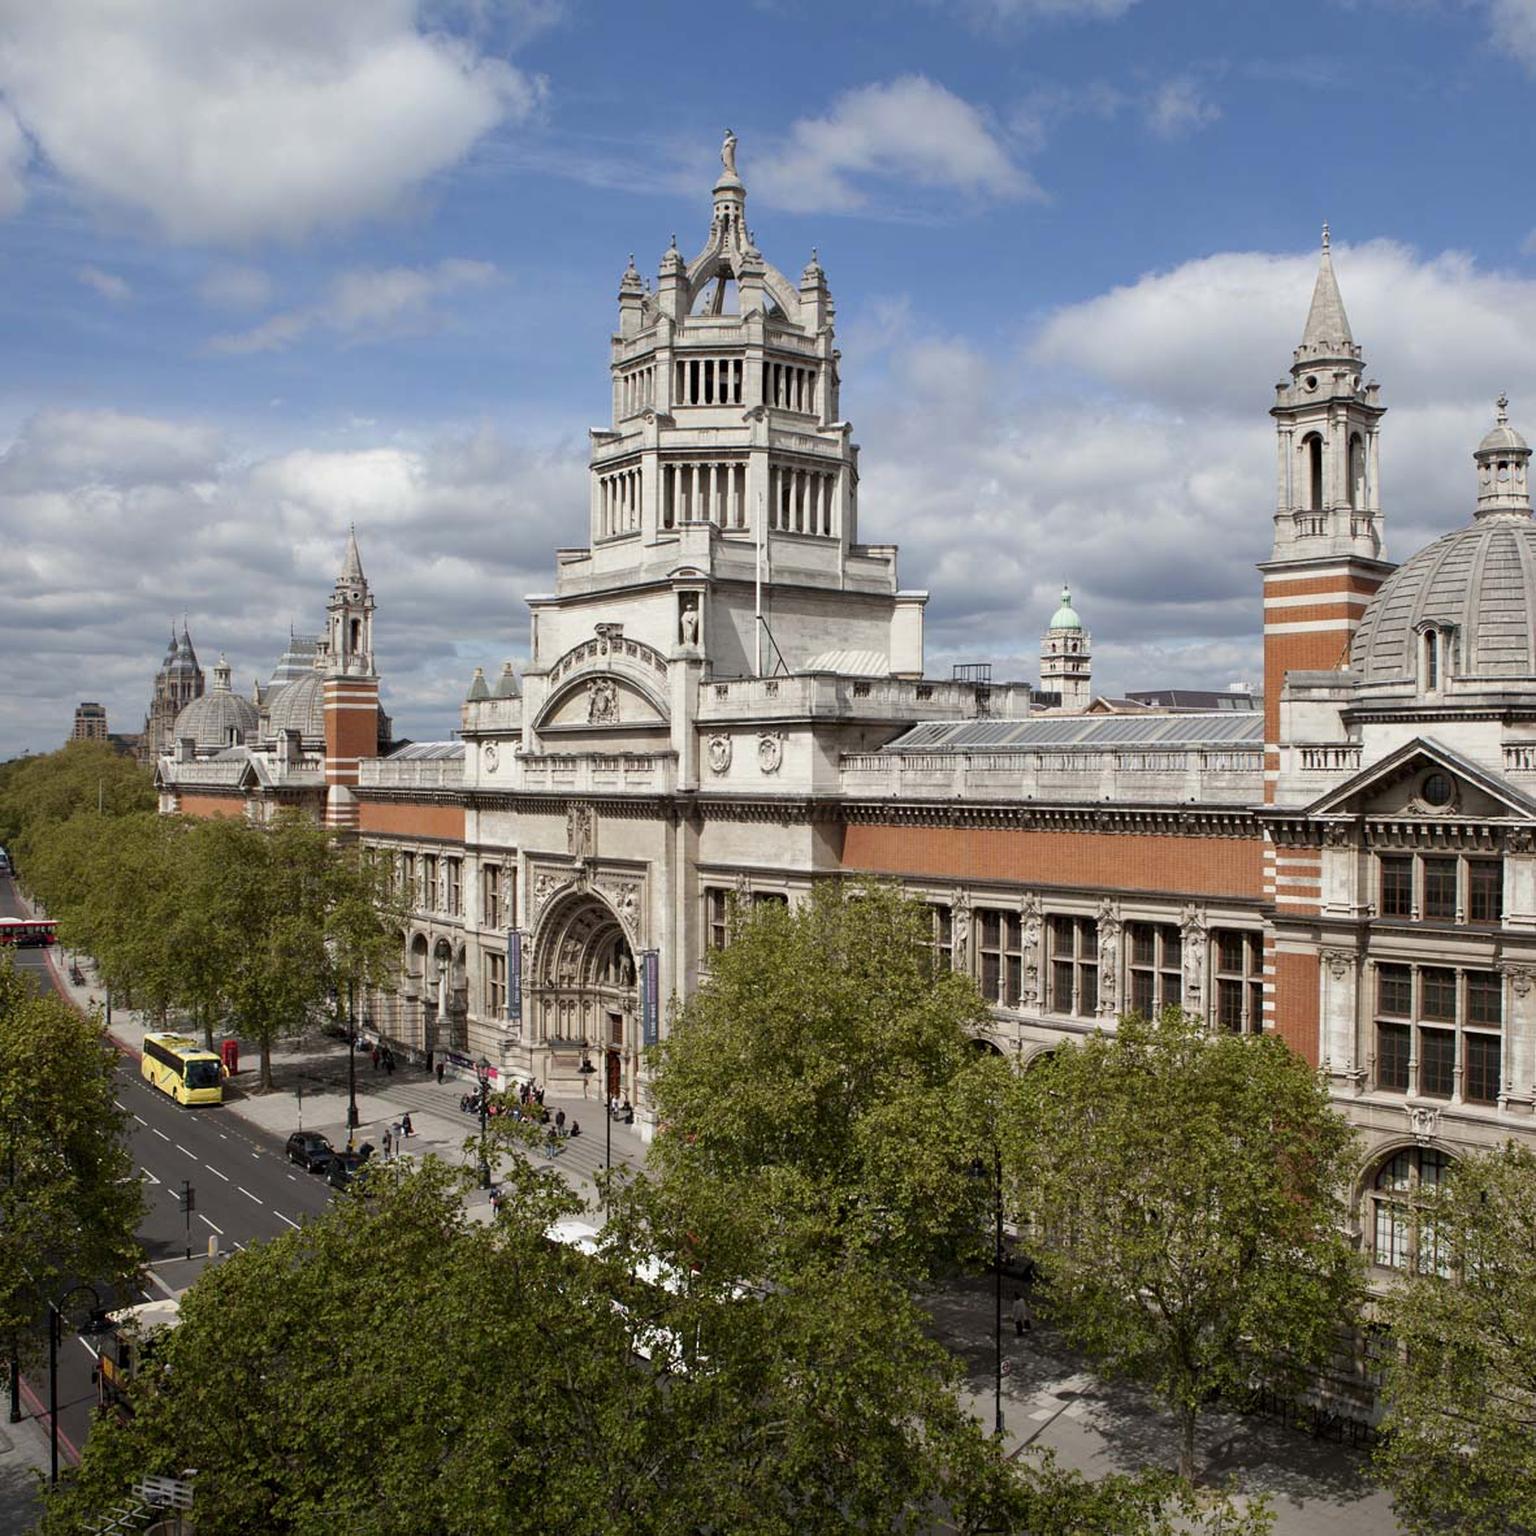 Victoria and Albert Museum exterior view from May 2012, London